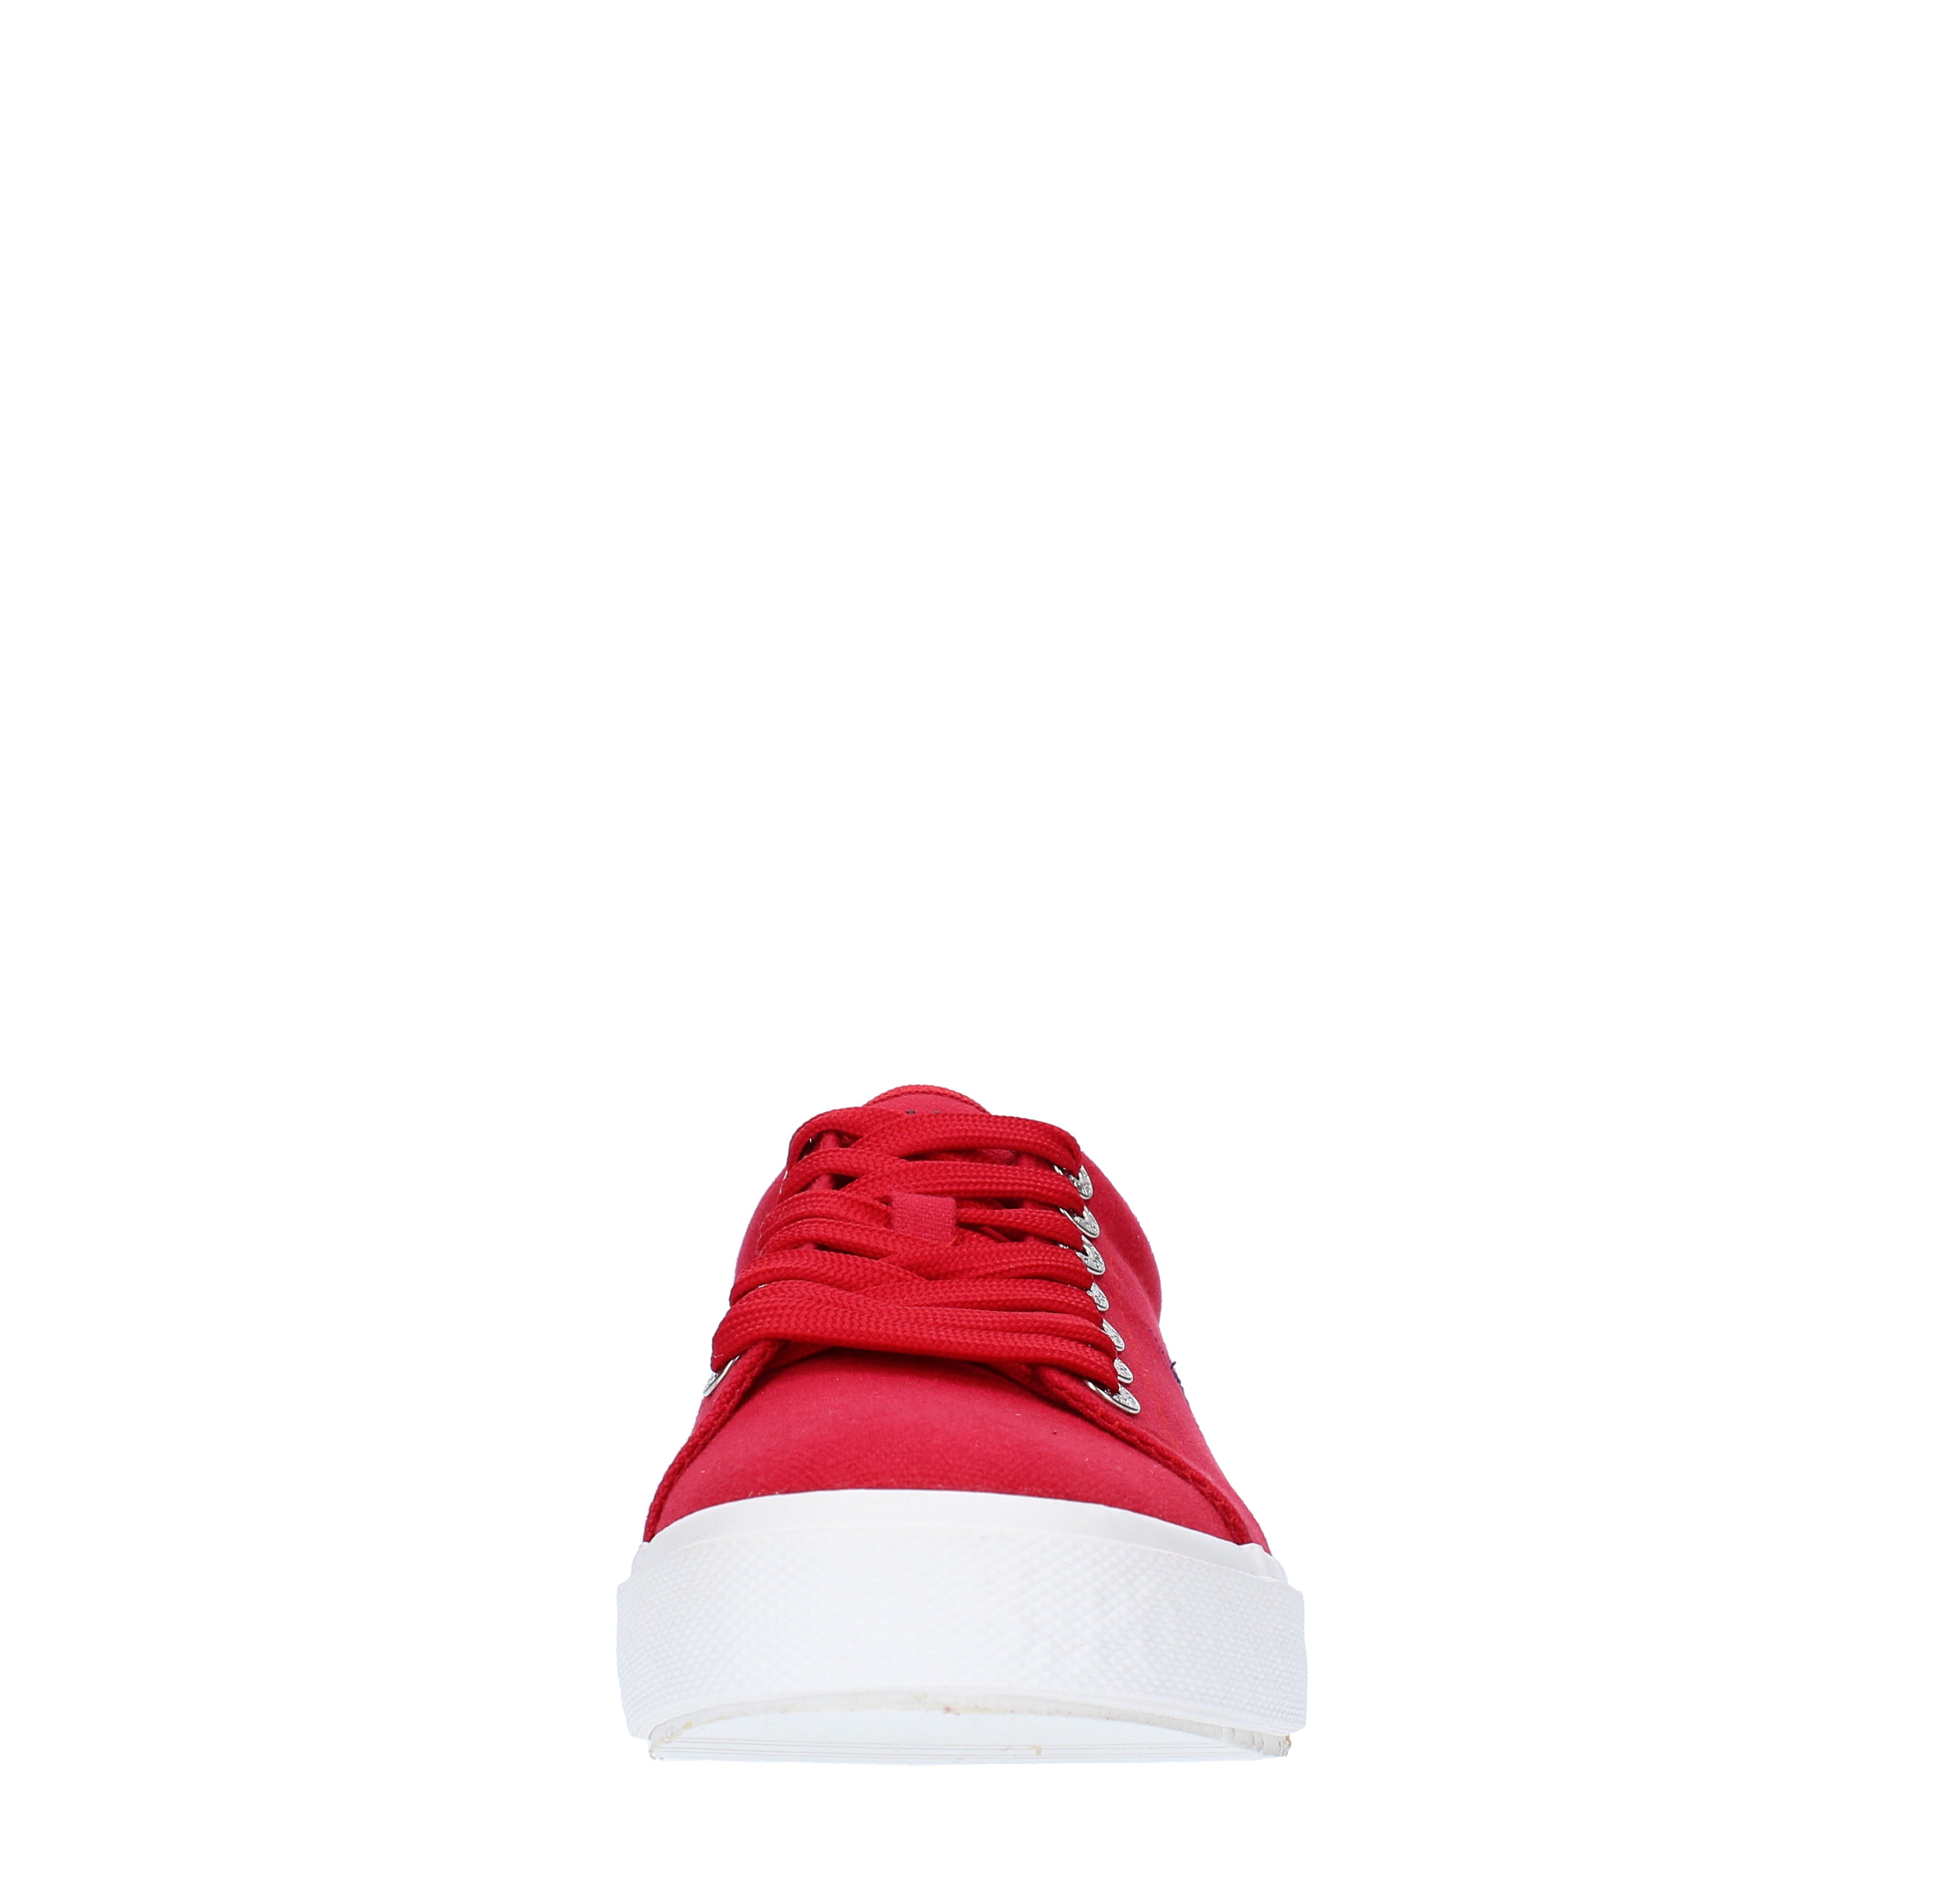 Fabric trainers U.S. POLO ASSN. | MARCS4082S0/CY1ROSSO